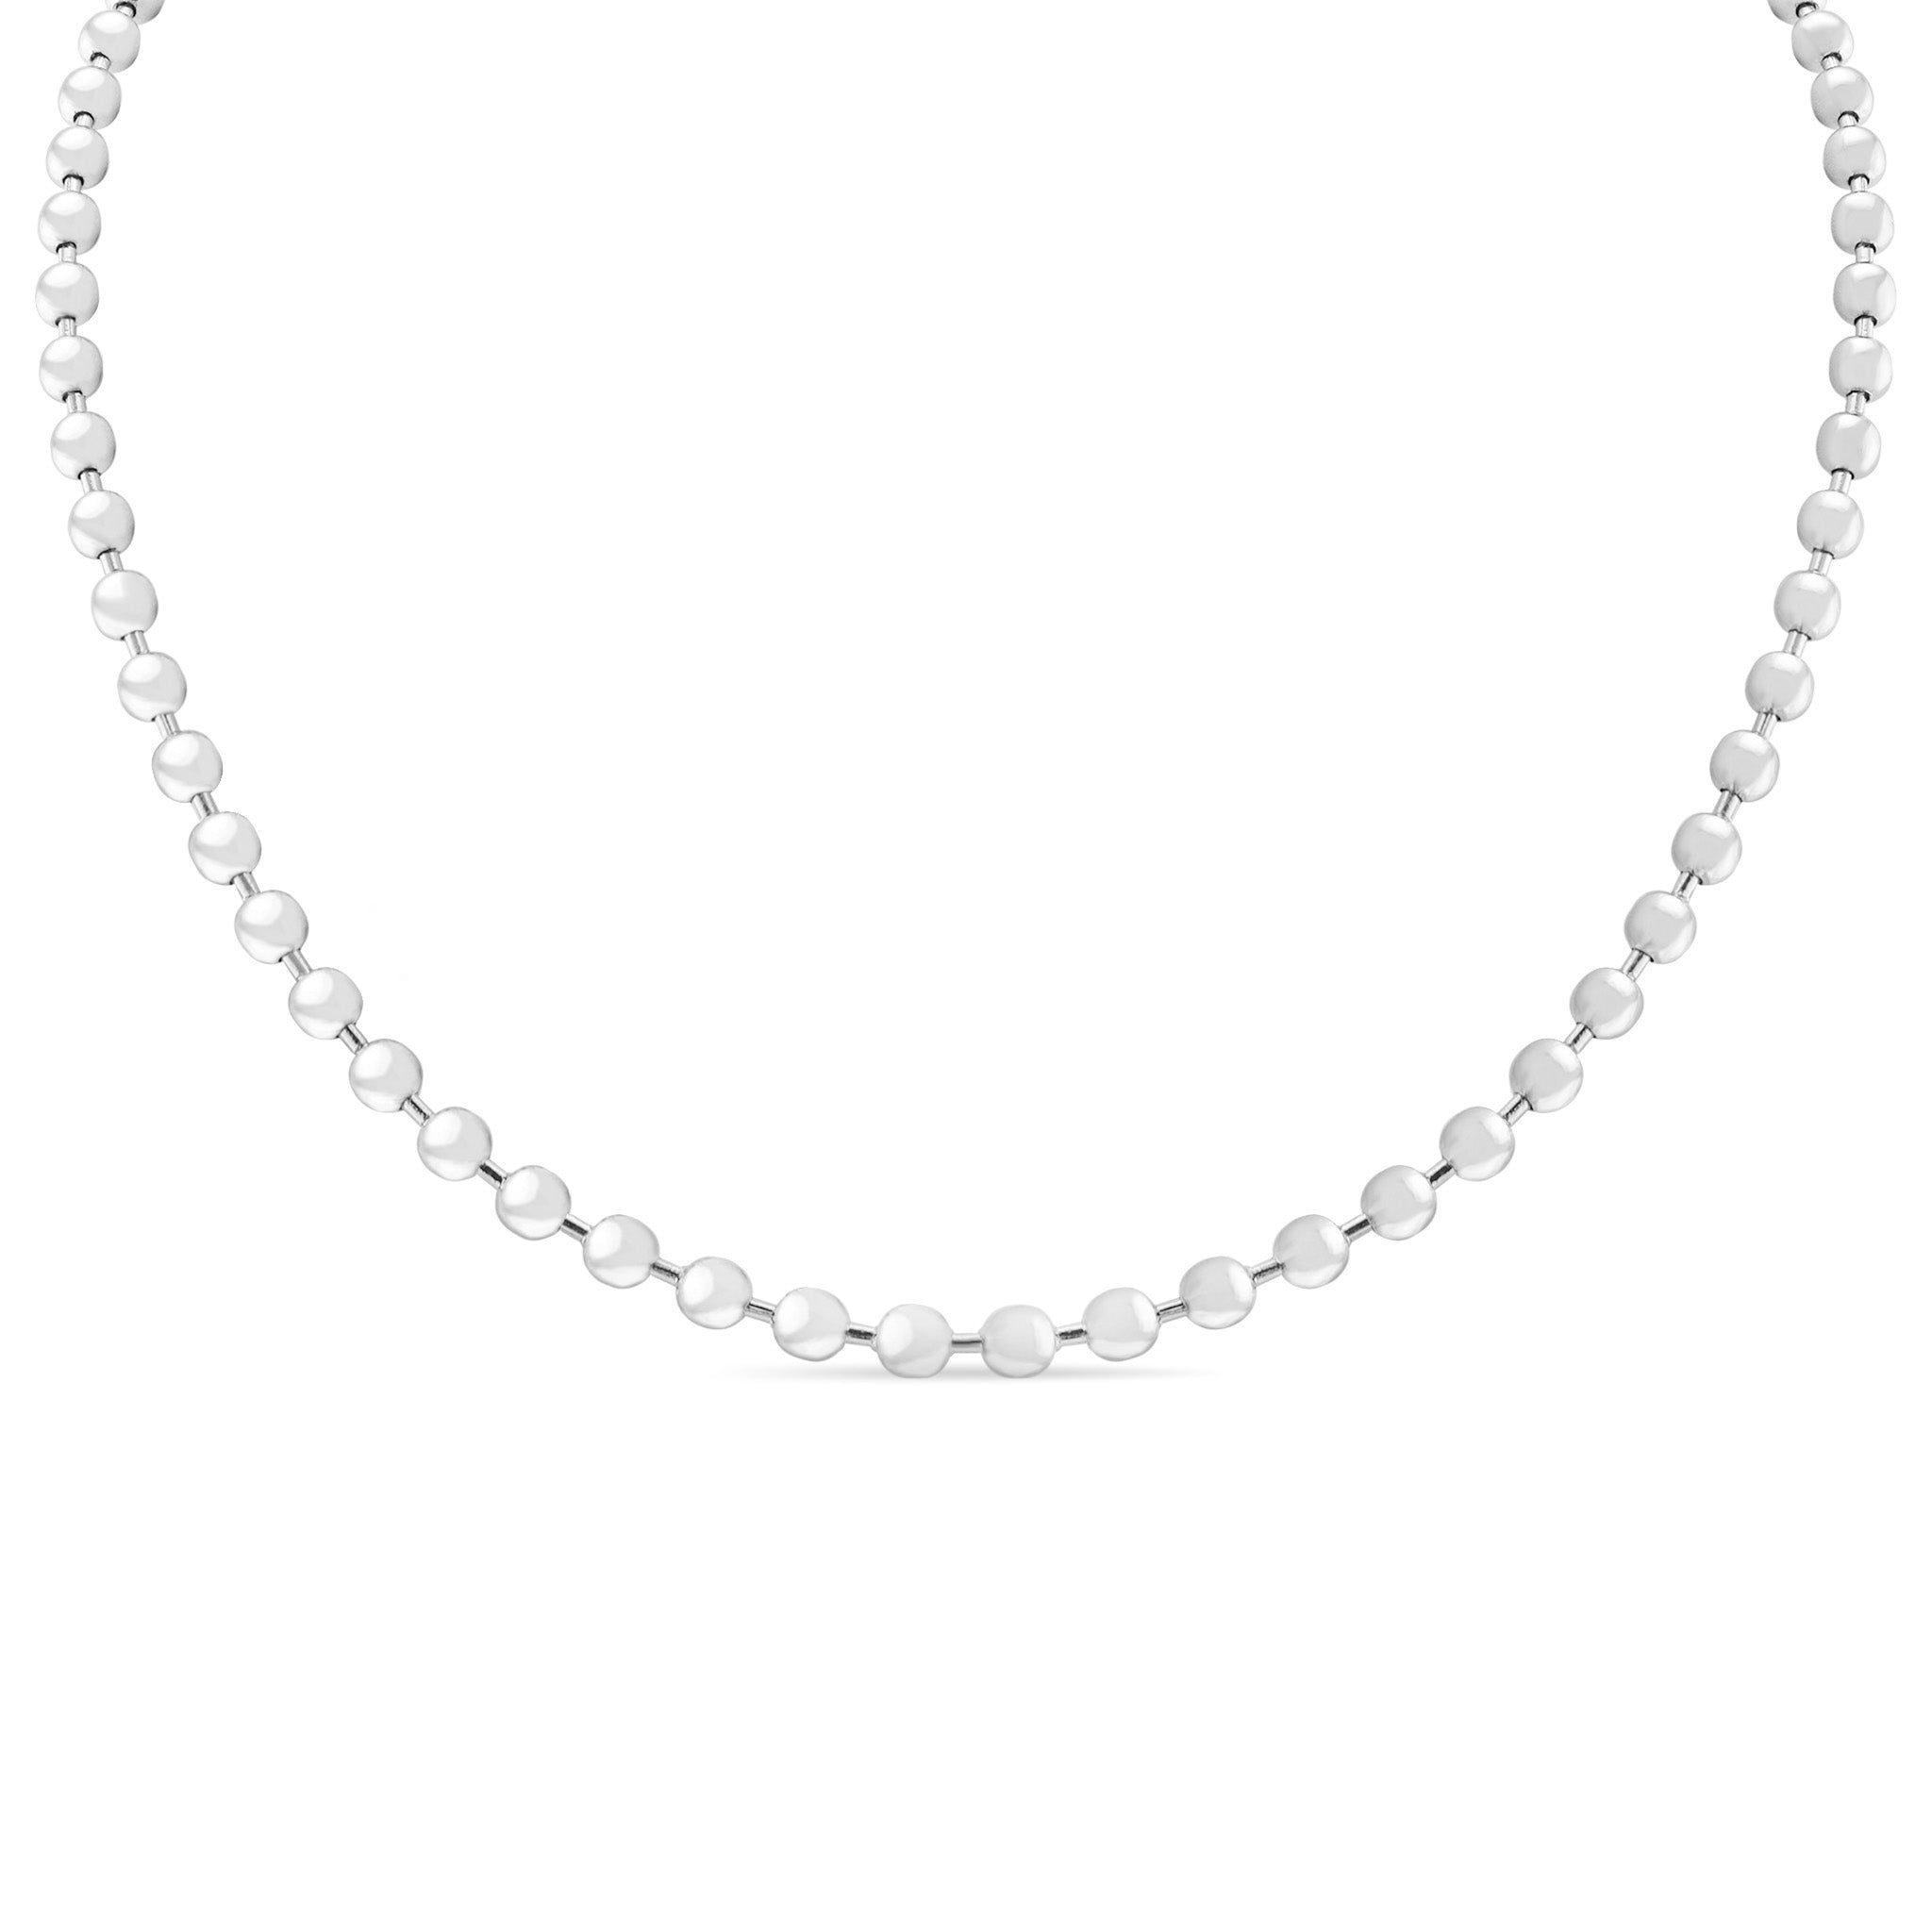 Stainless Steel Ball Chain Necklace, Silver Jewelry